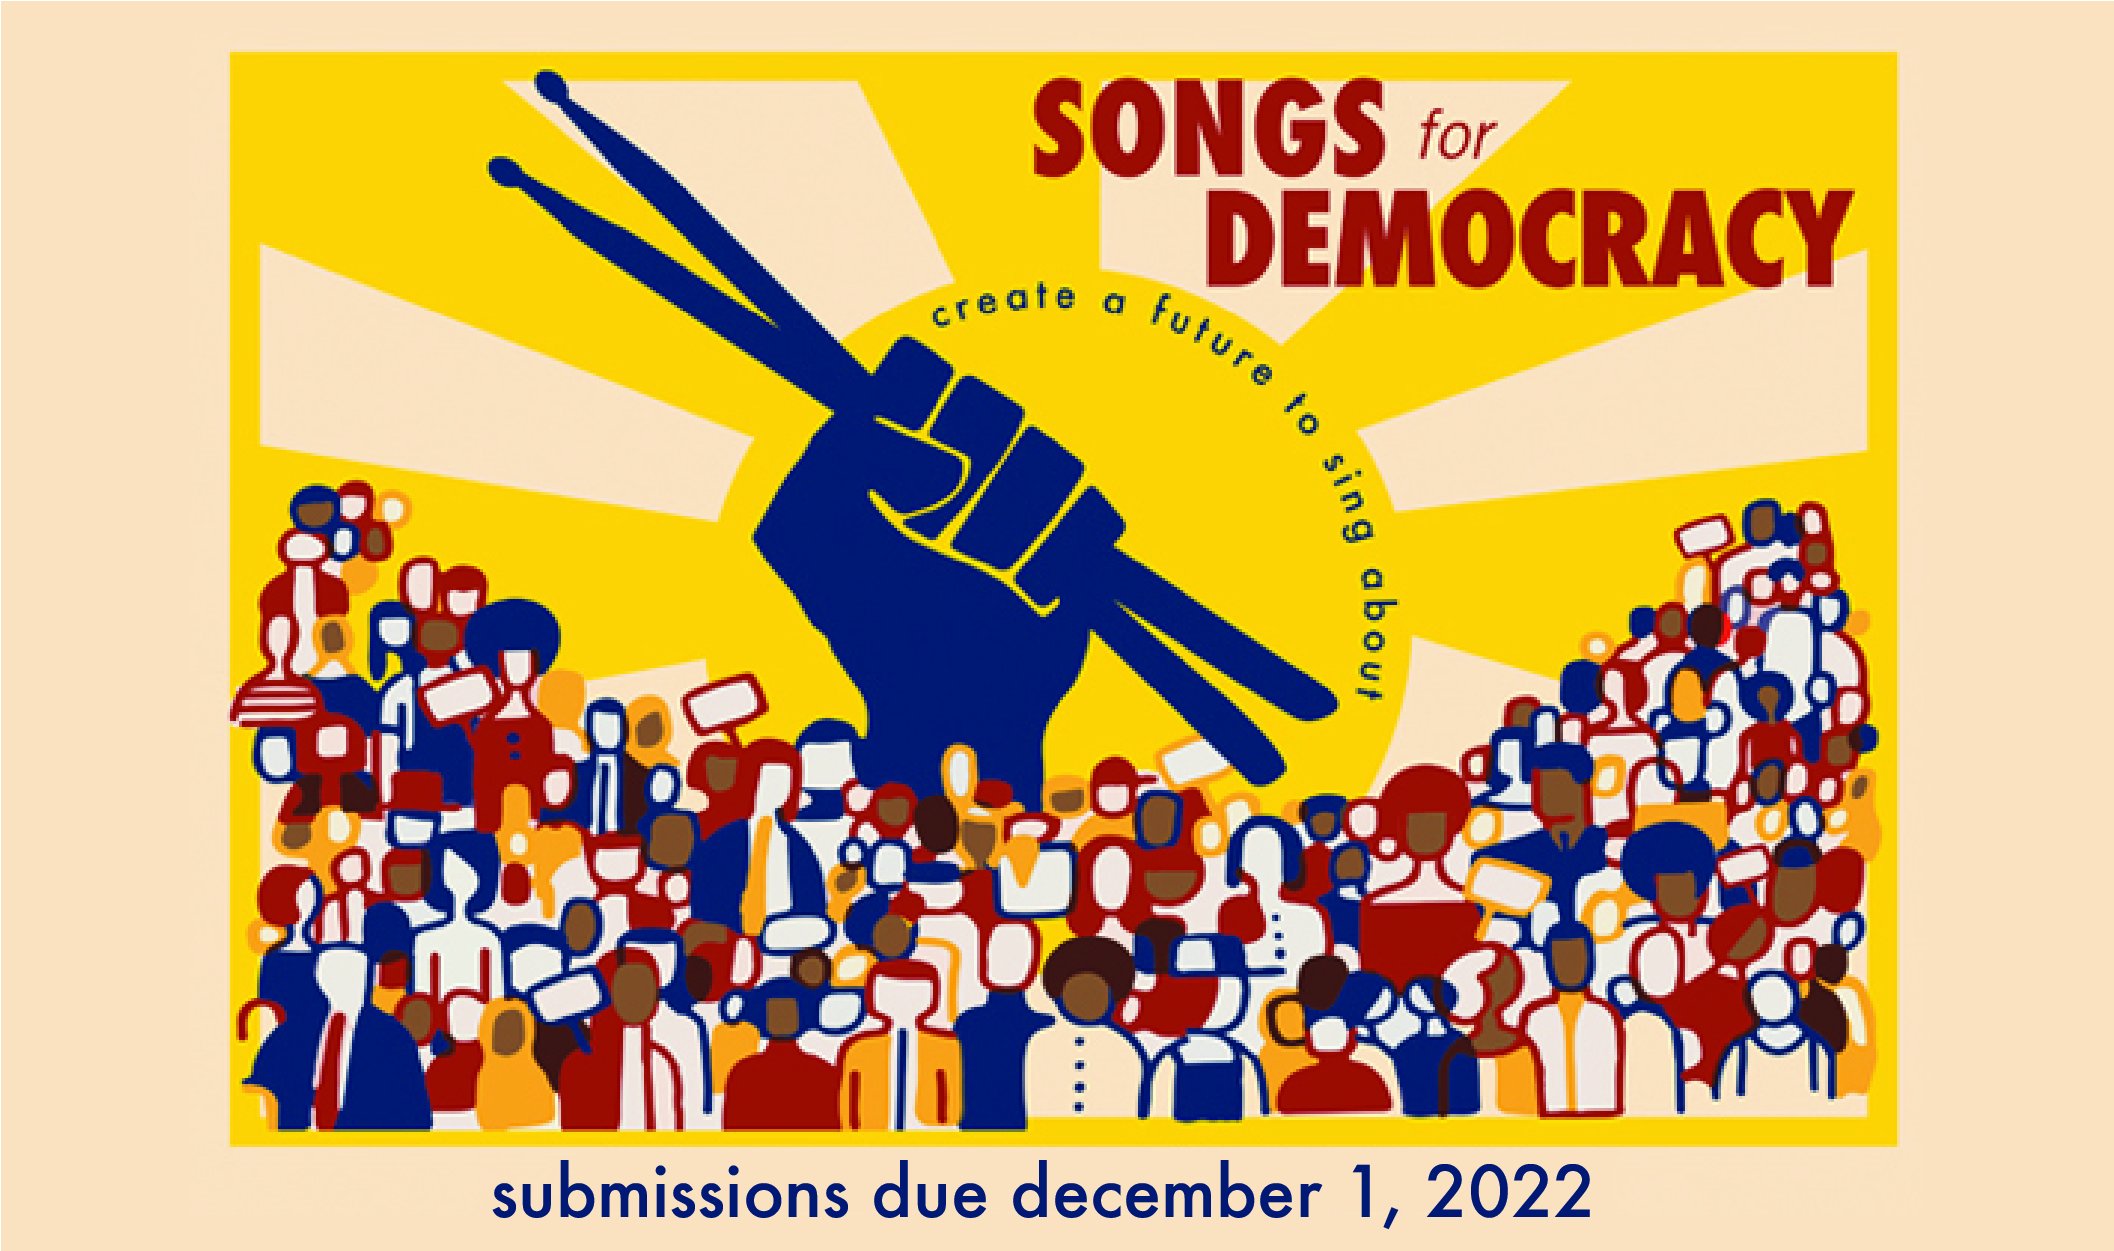 Songs for Democracy. Create a future to sing about. Submissions due December 1, 2022.